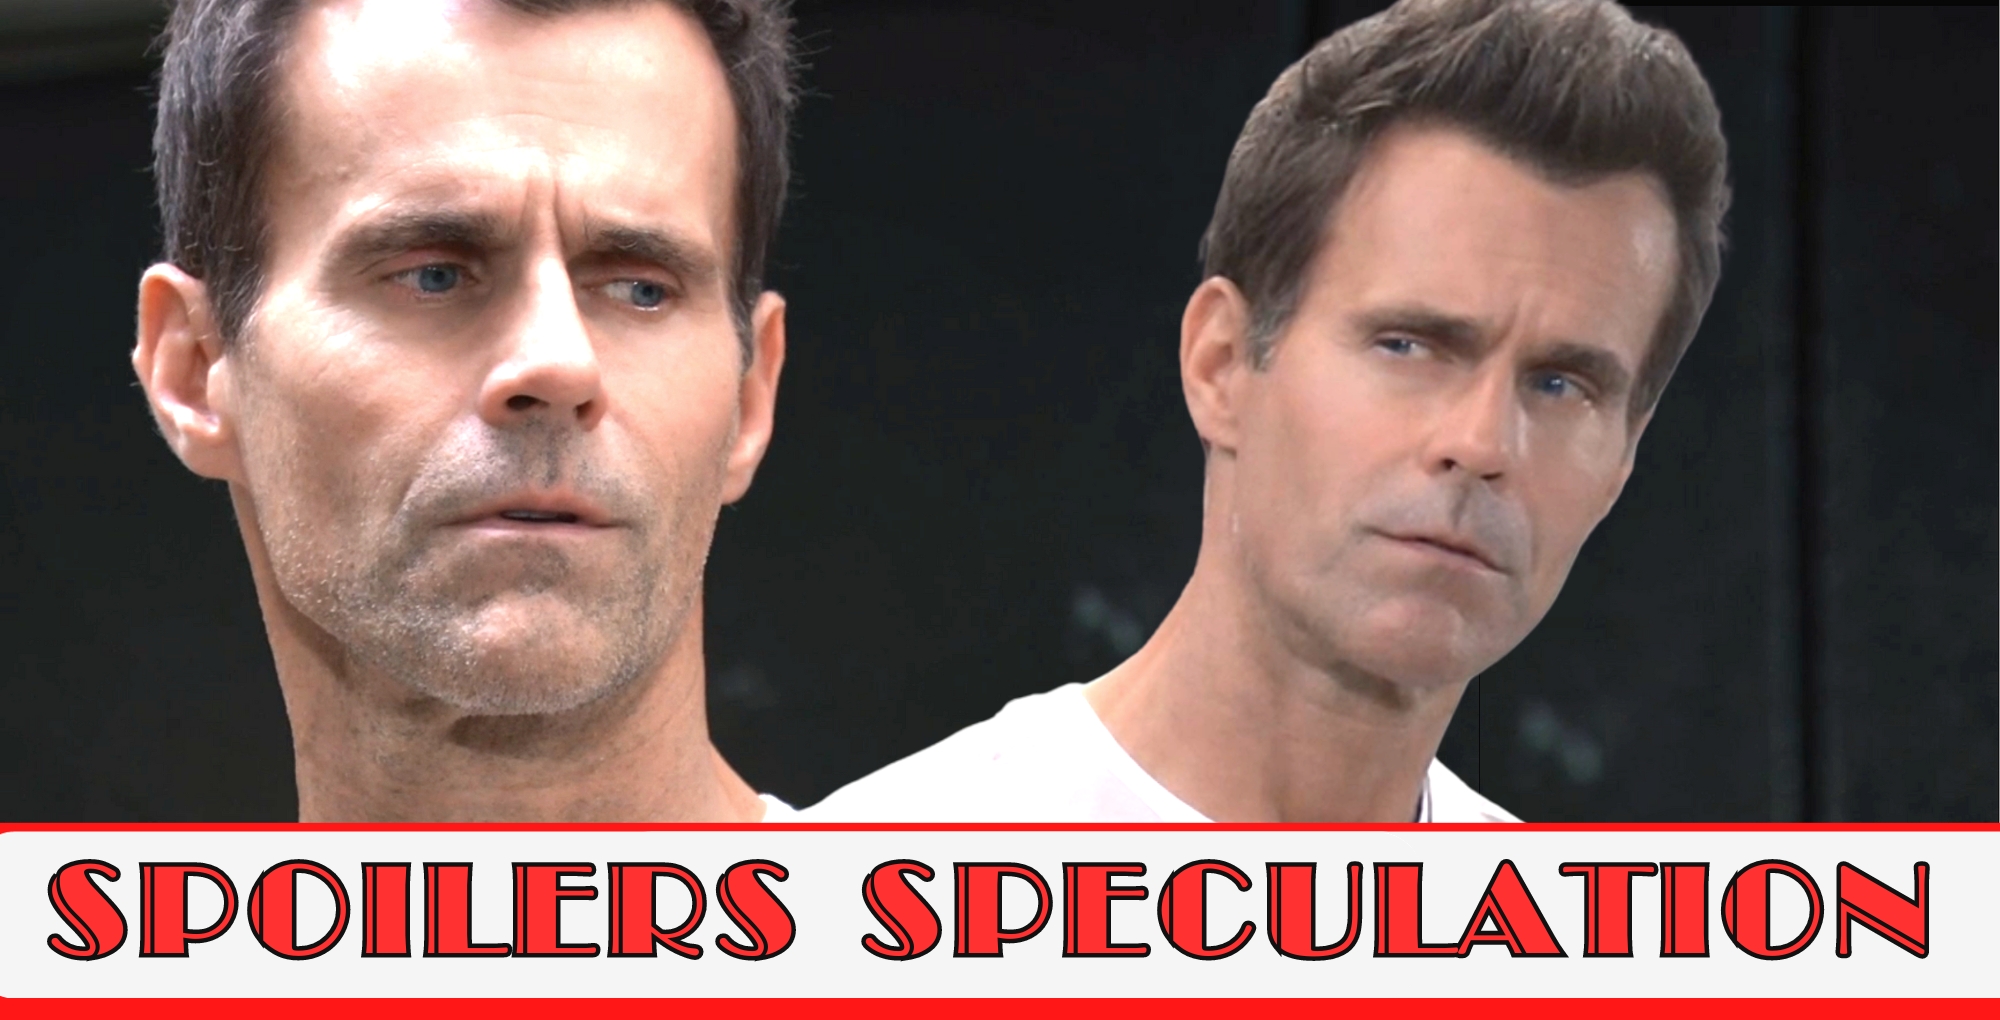 gh spoilers speculation banner over double image of drew.